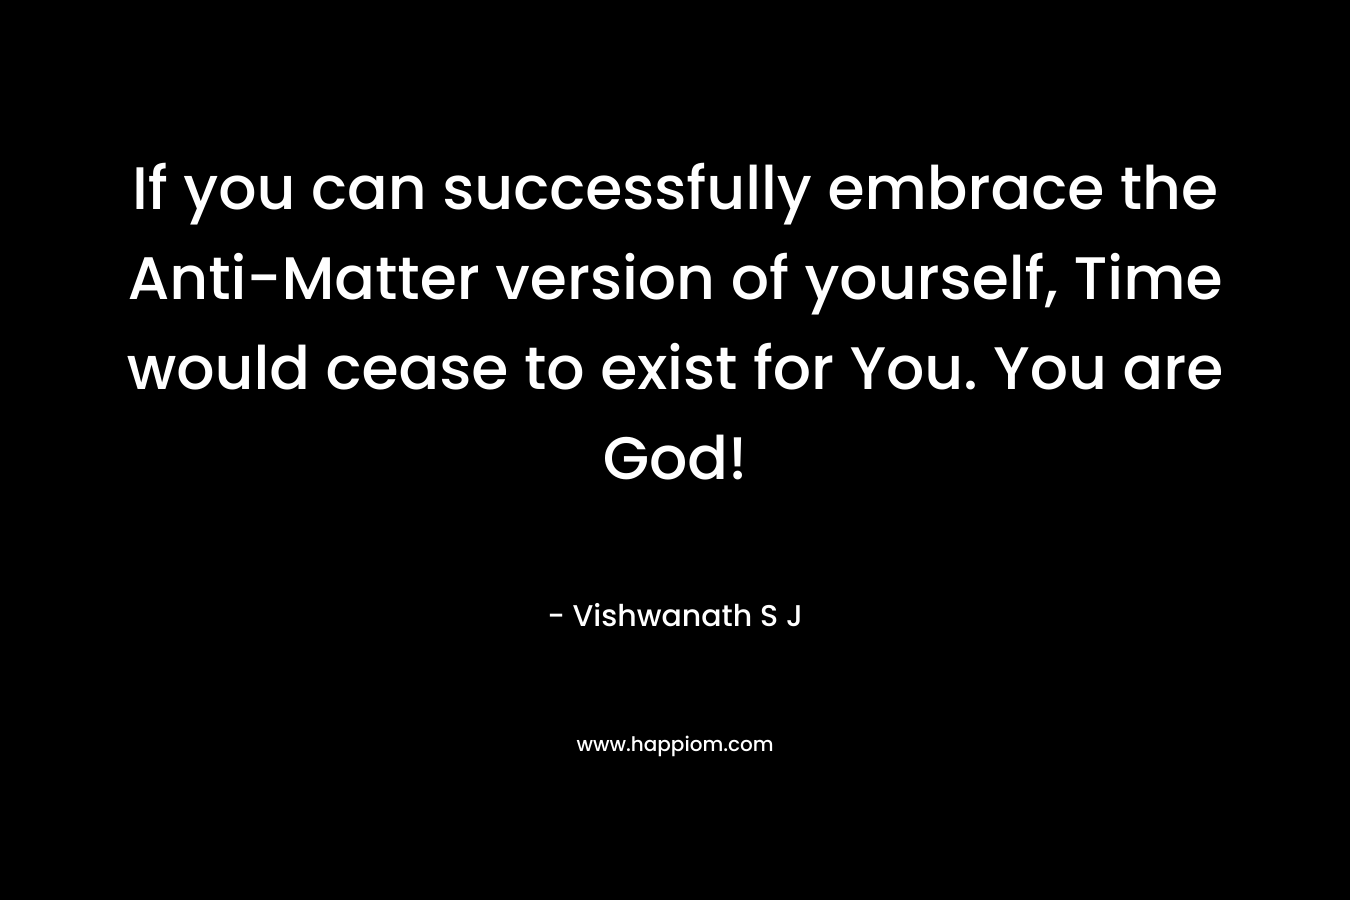 If you can successfully embrace the Anti-Matter version of yourself, Time would cease to exist for You. You are God! – Vishwanath S J